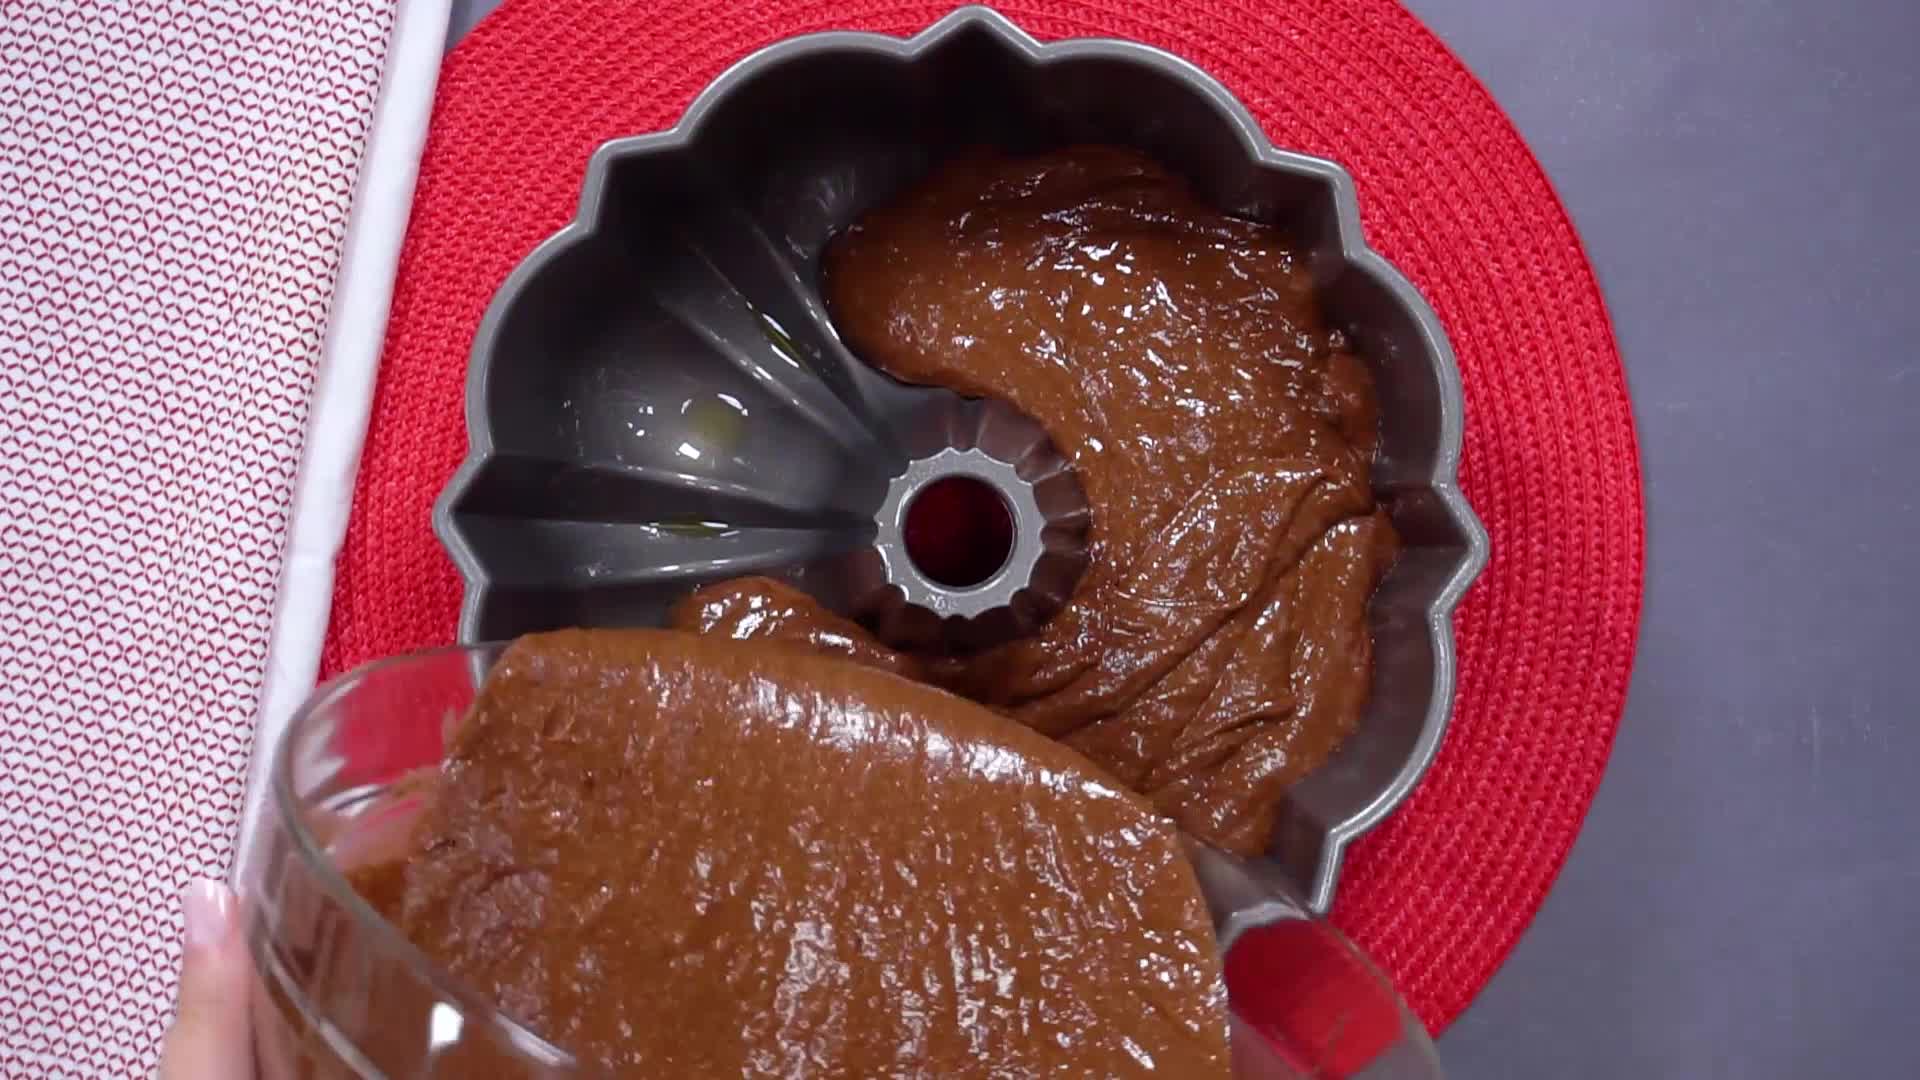 Chocolate Macaroon Tunnel Cake - Just like the old box mix! (+Video)